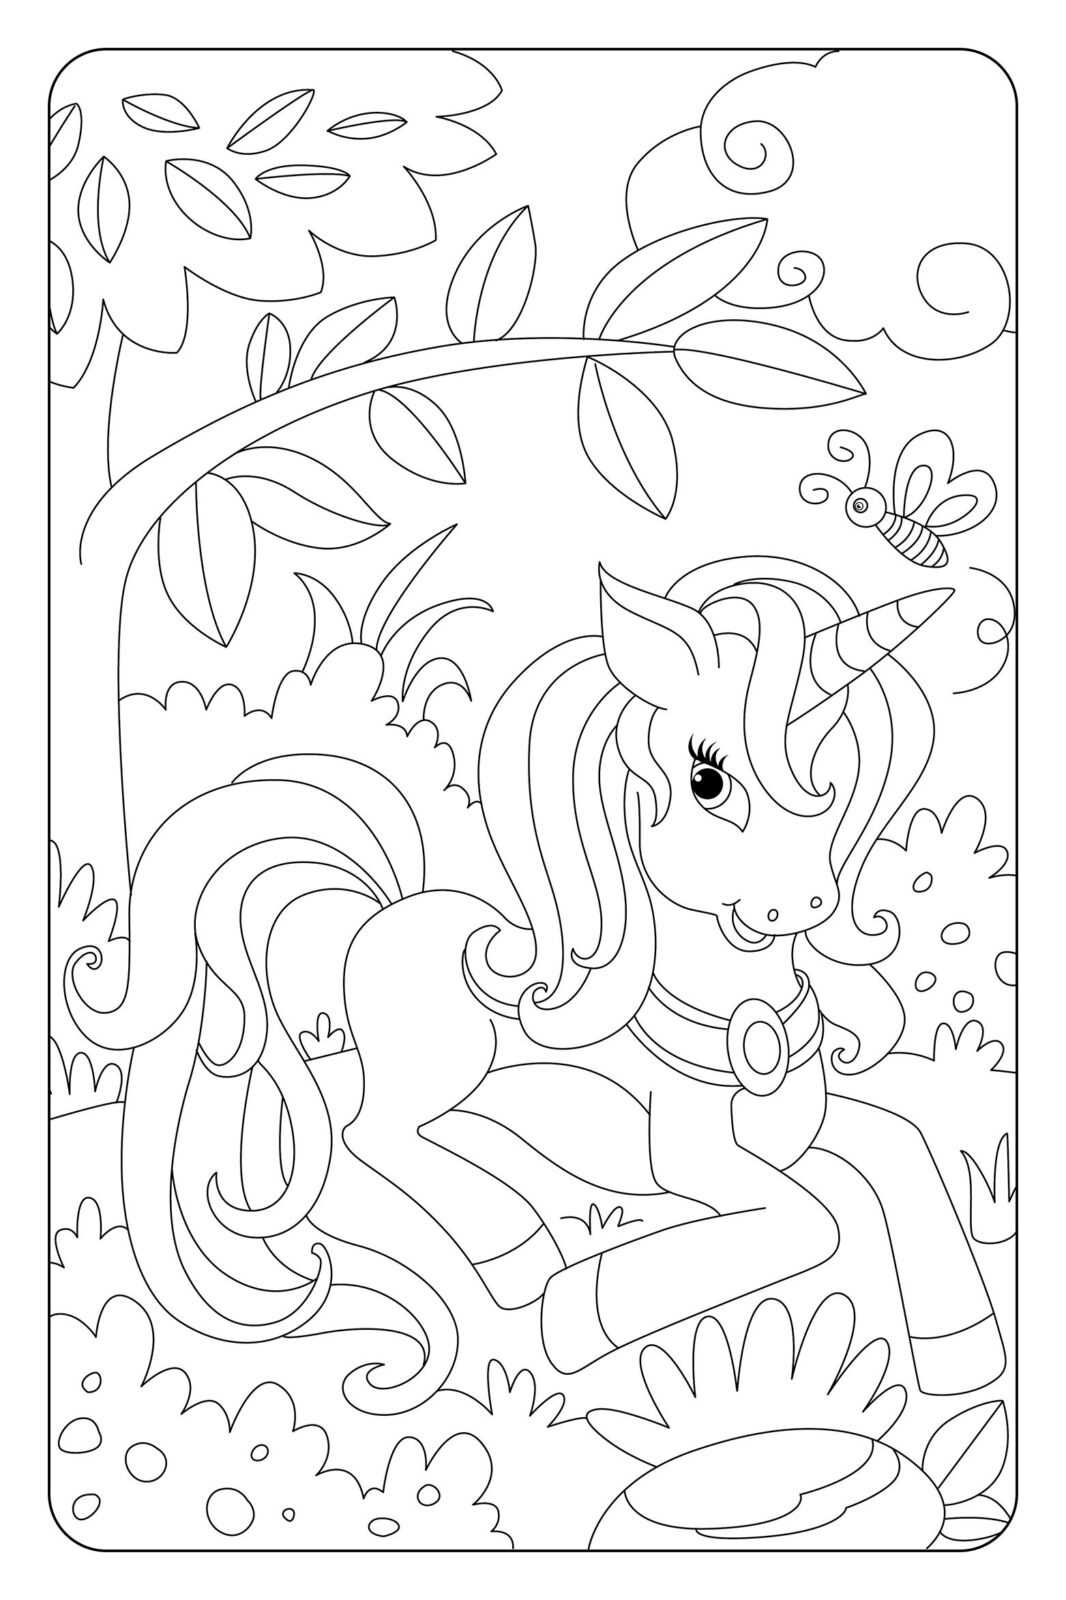 Giant Book Series Unicorn Colouring Book - Art Central